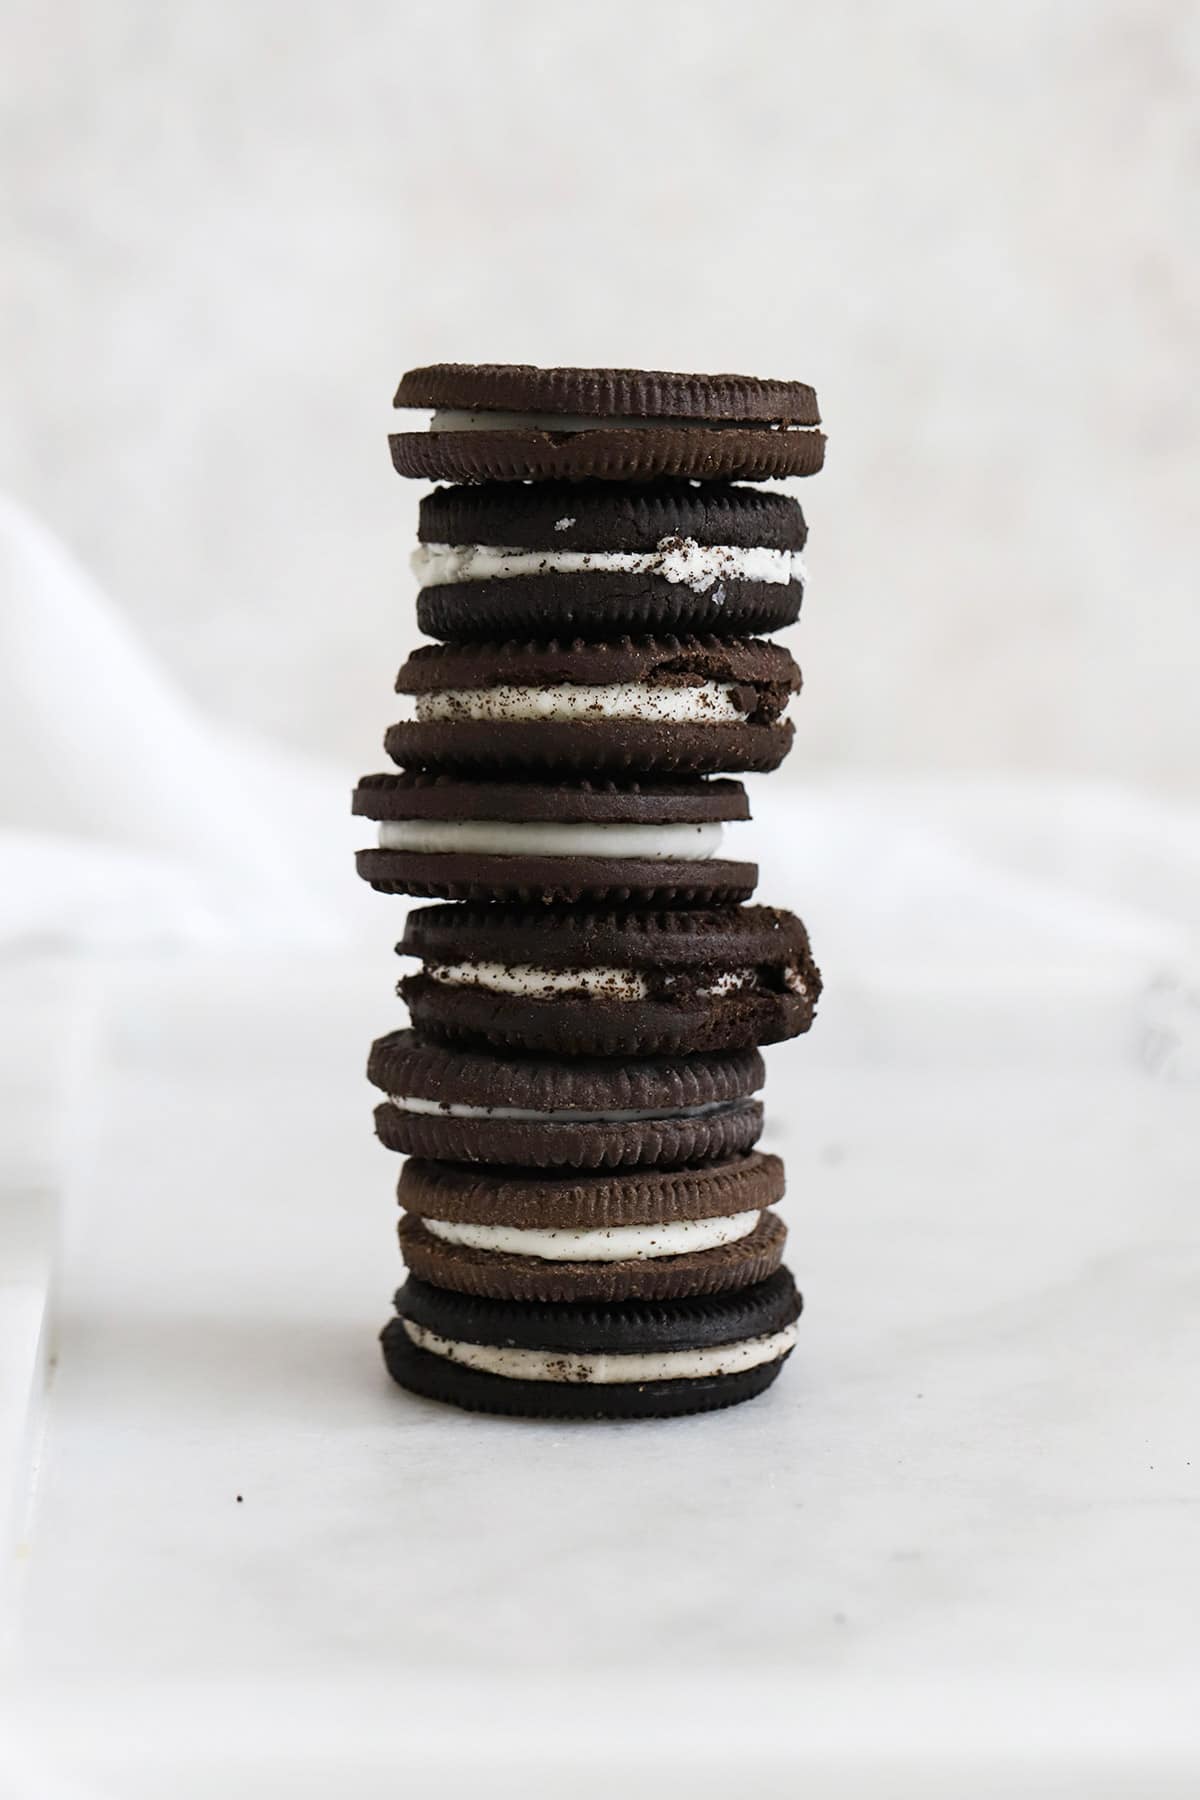 Front view of a stack of 8 kinds of gluten-free chocolate sandwich cookies